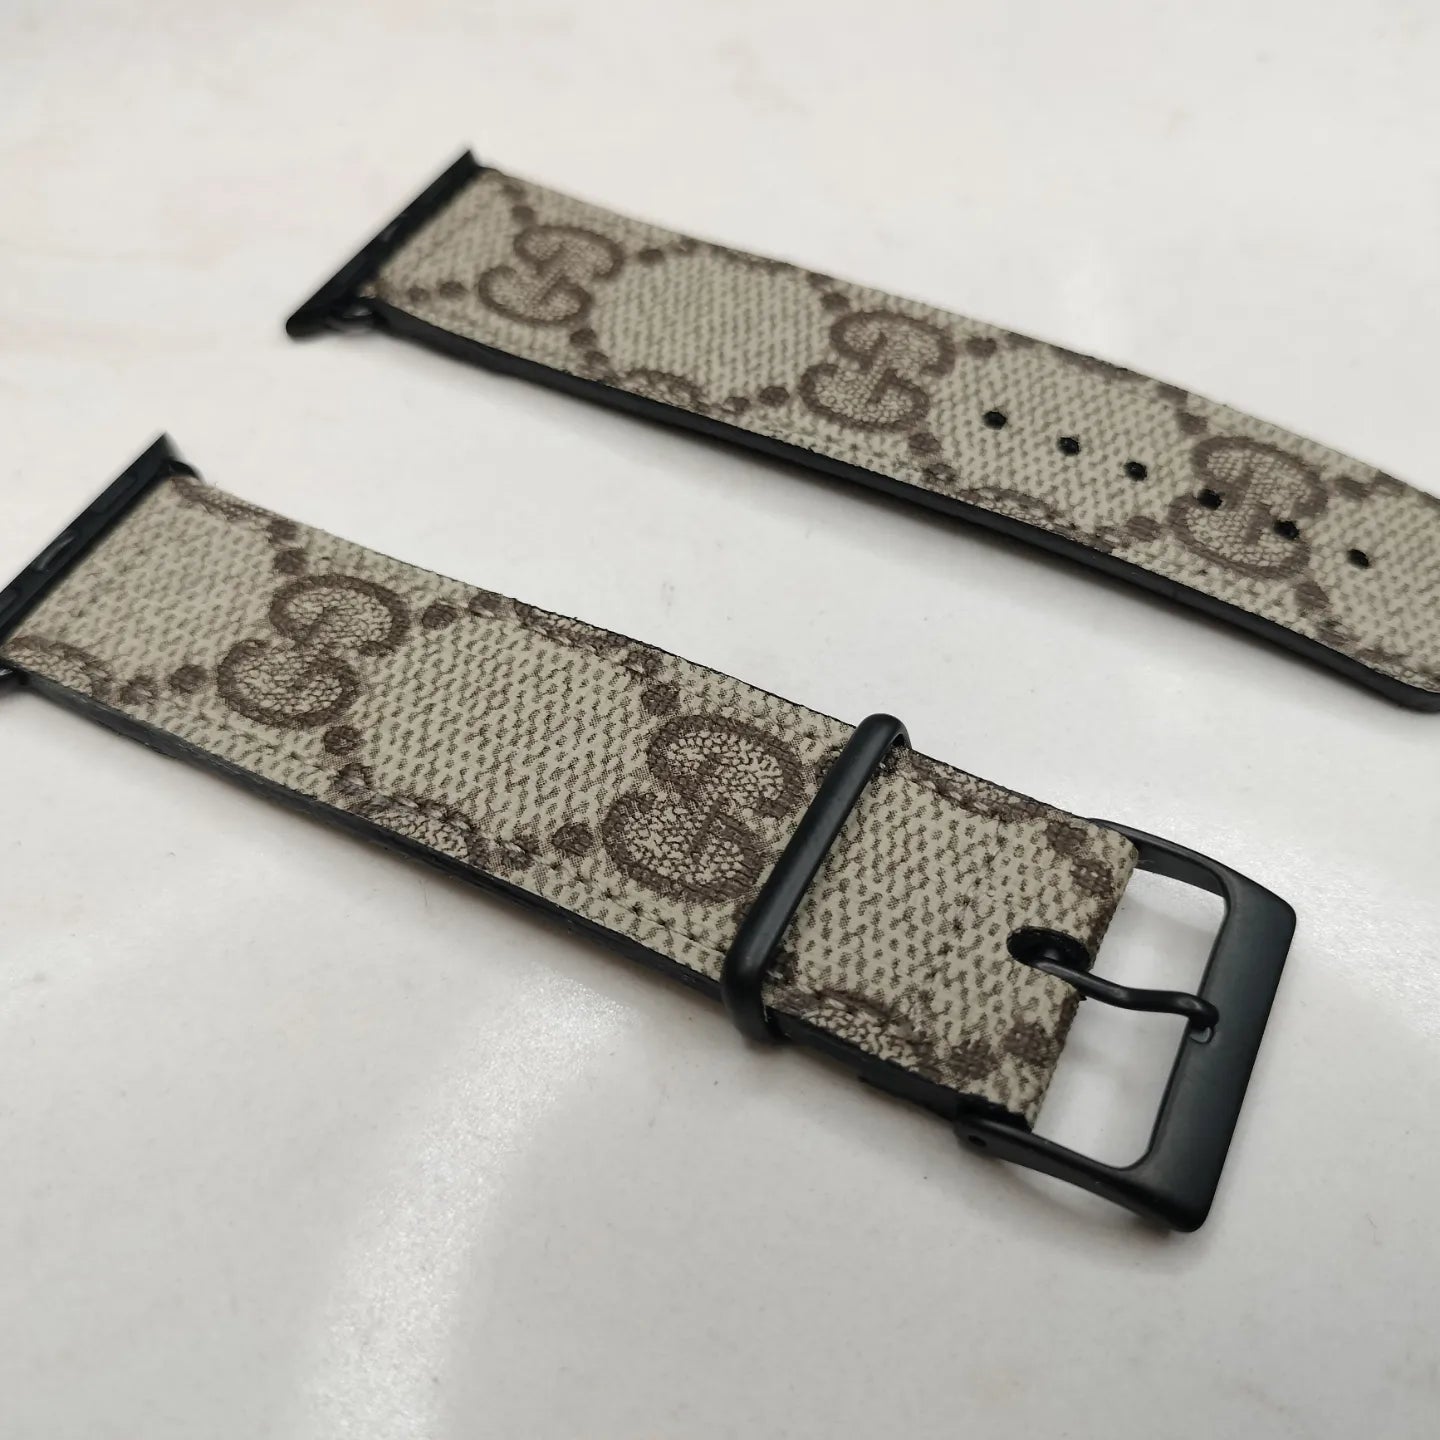 Upcycled GUCCI Apple Watch Band